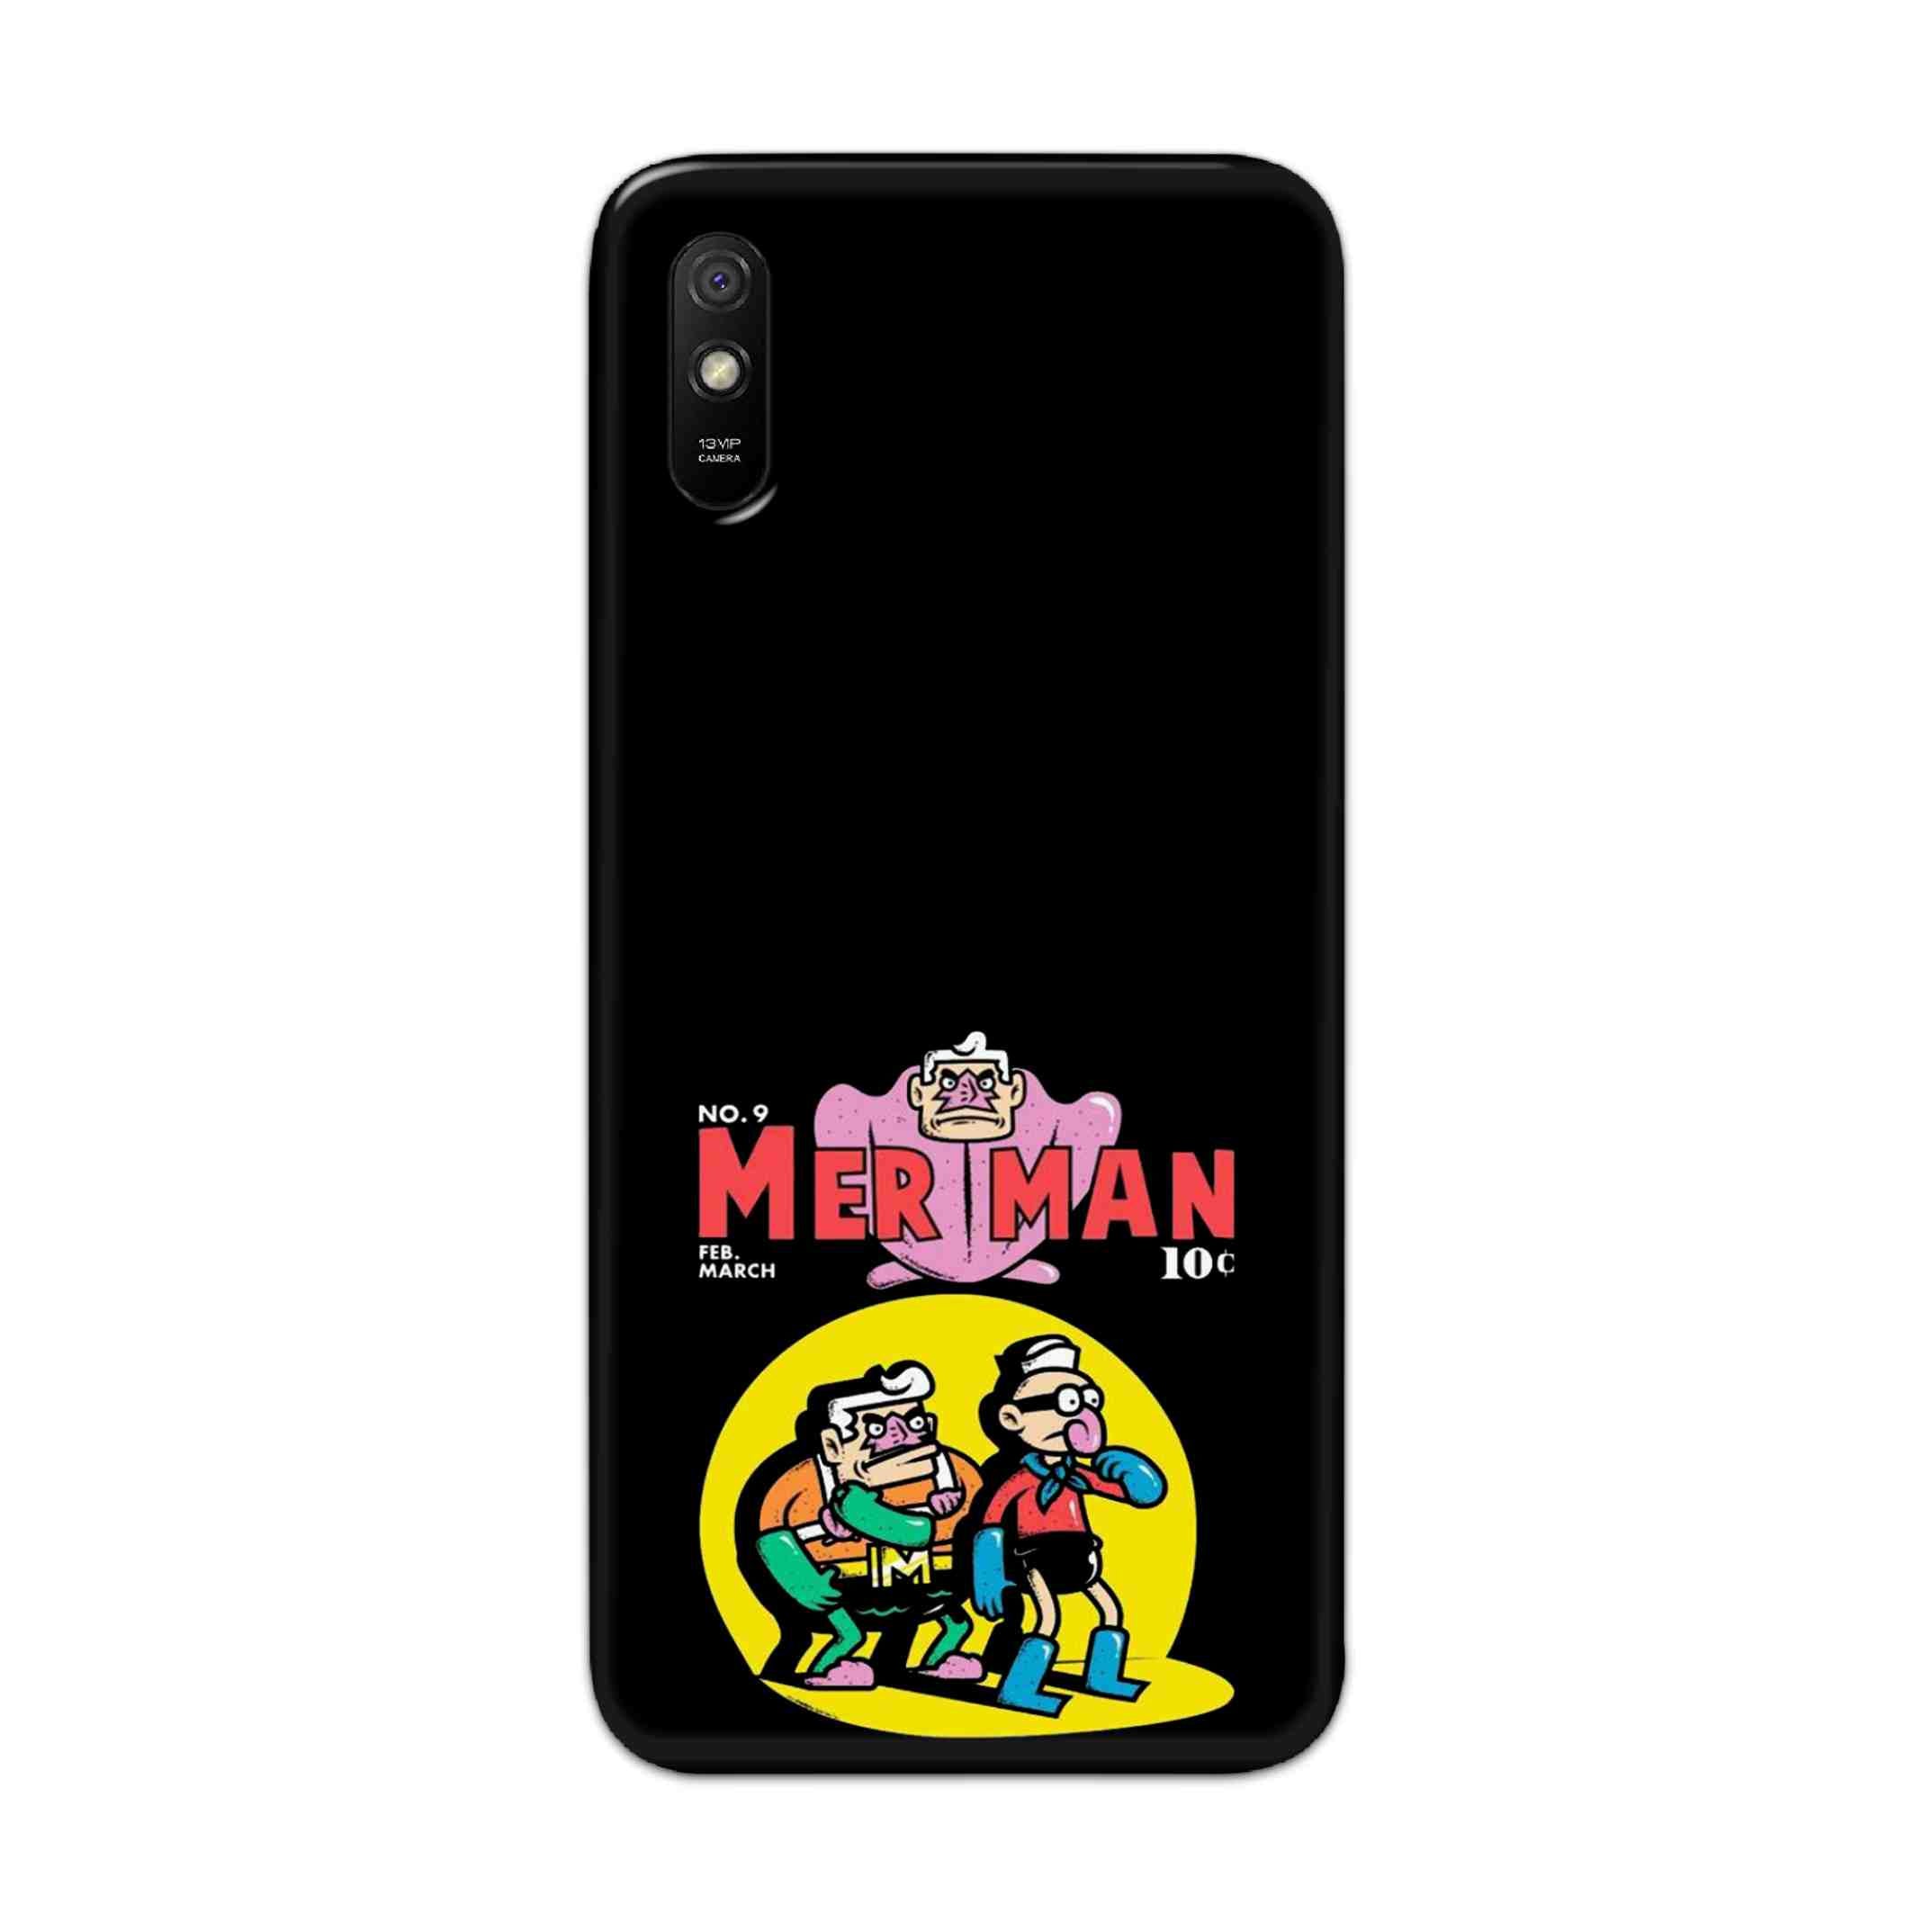 Buy Merman Hard Back Mobile Phone Case Cover For Redmi 9A Online